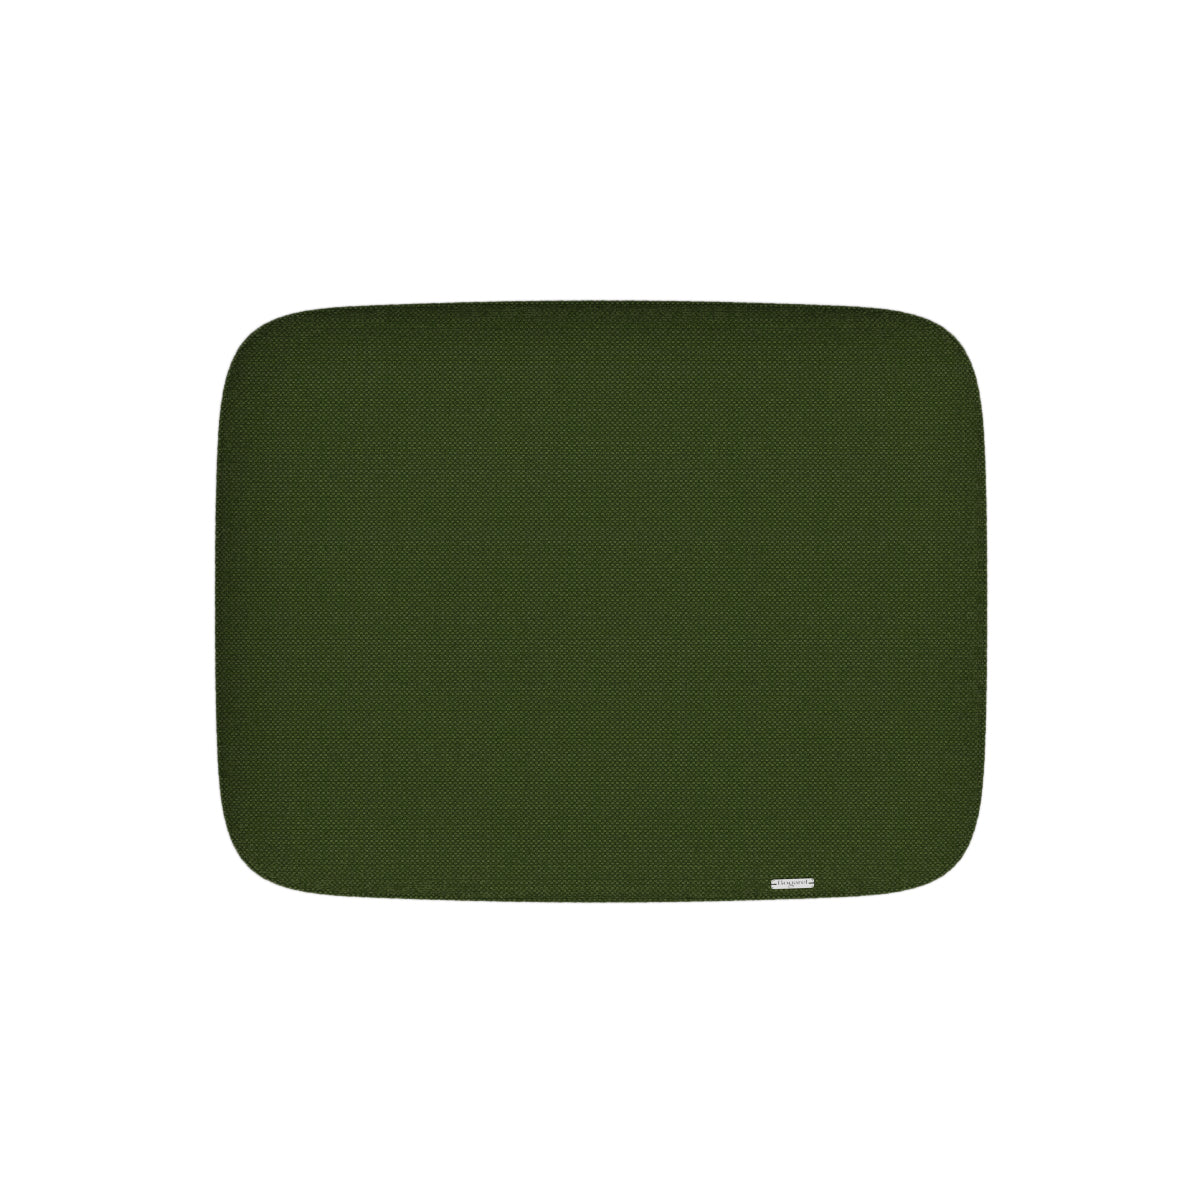 Coussin pour chat vert - kasibe